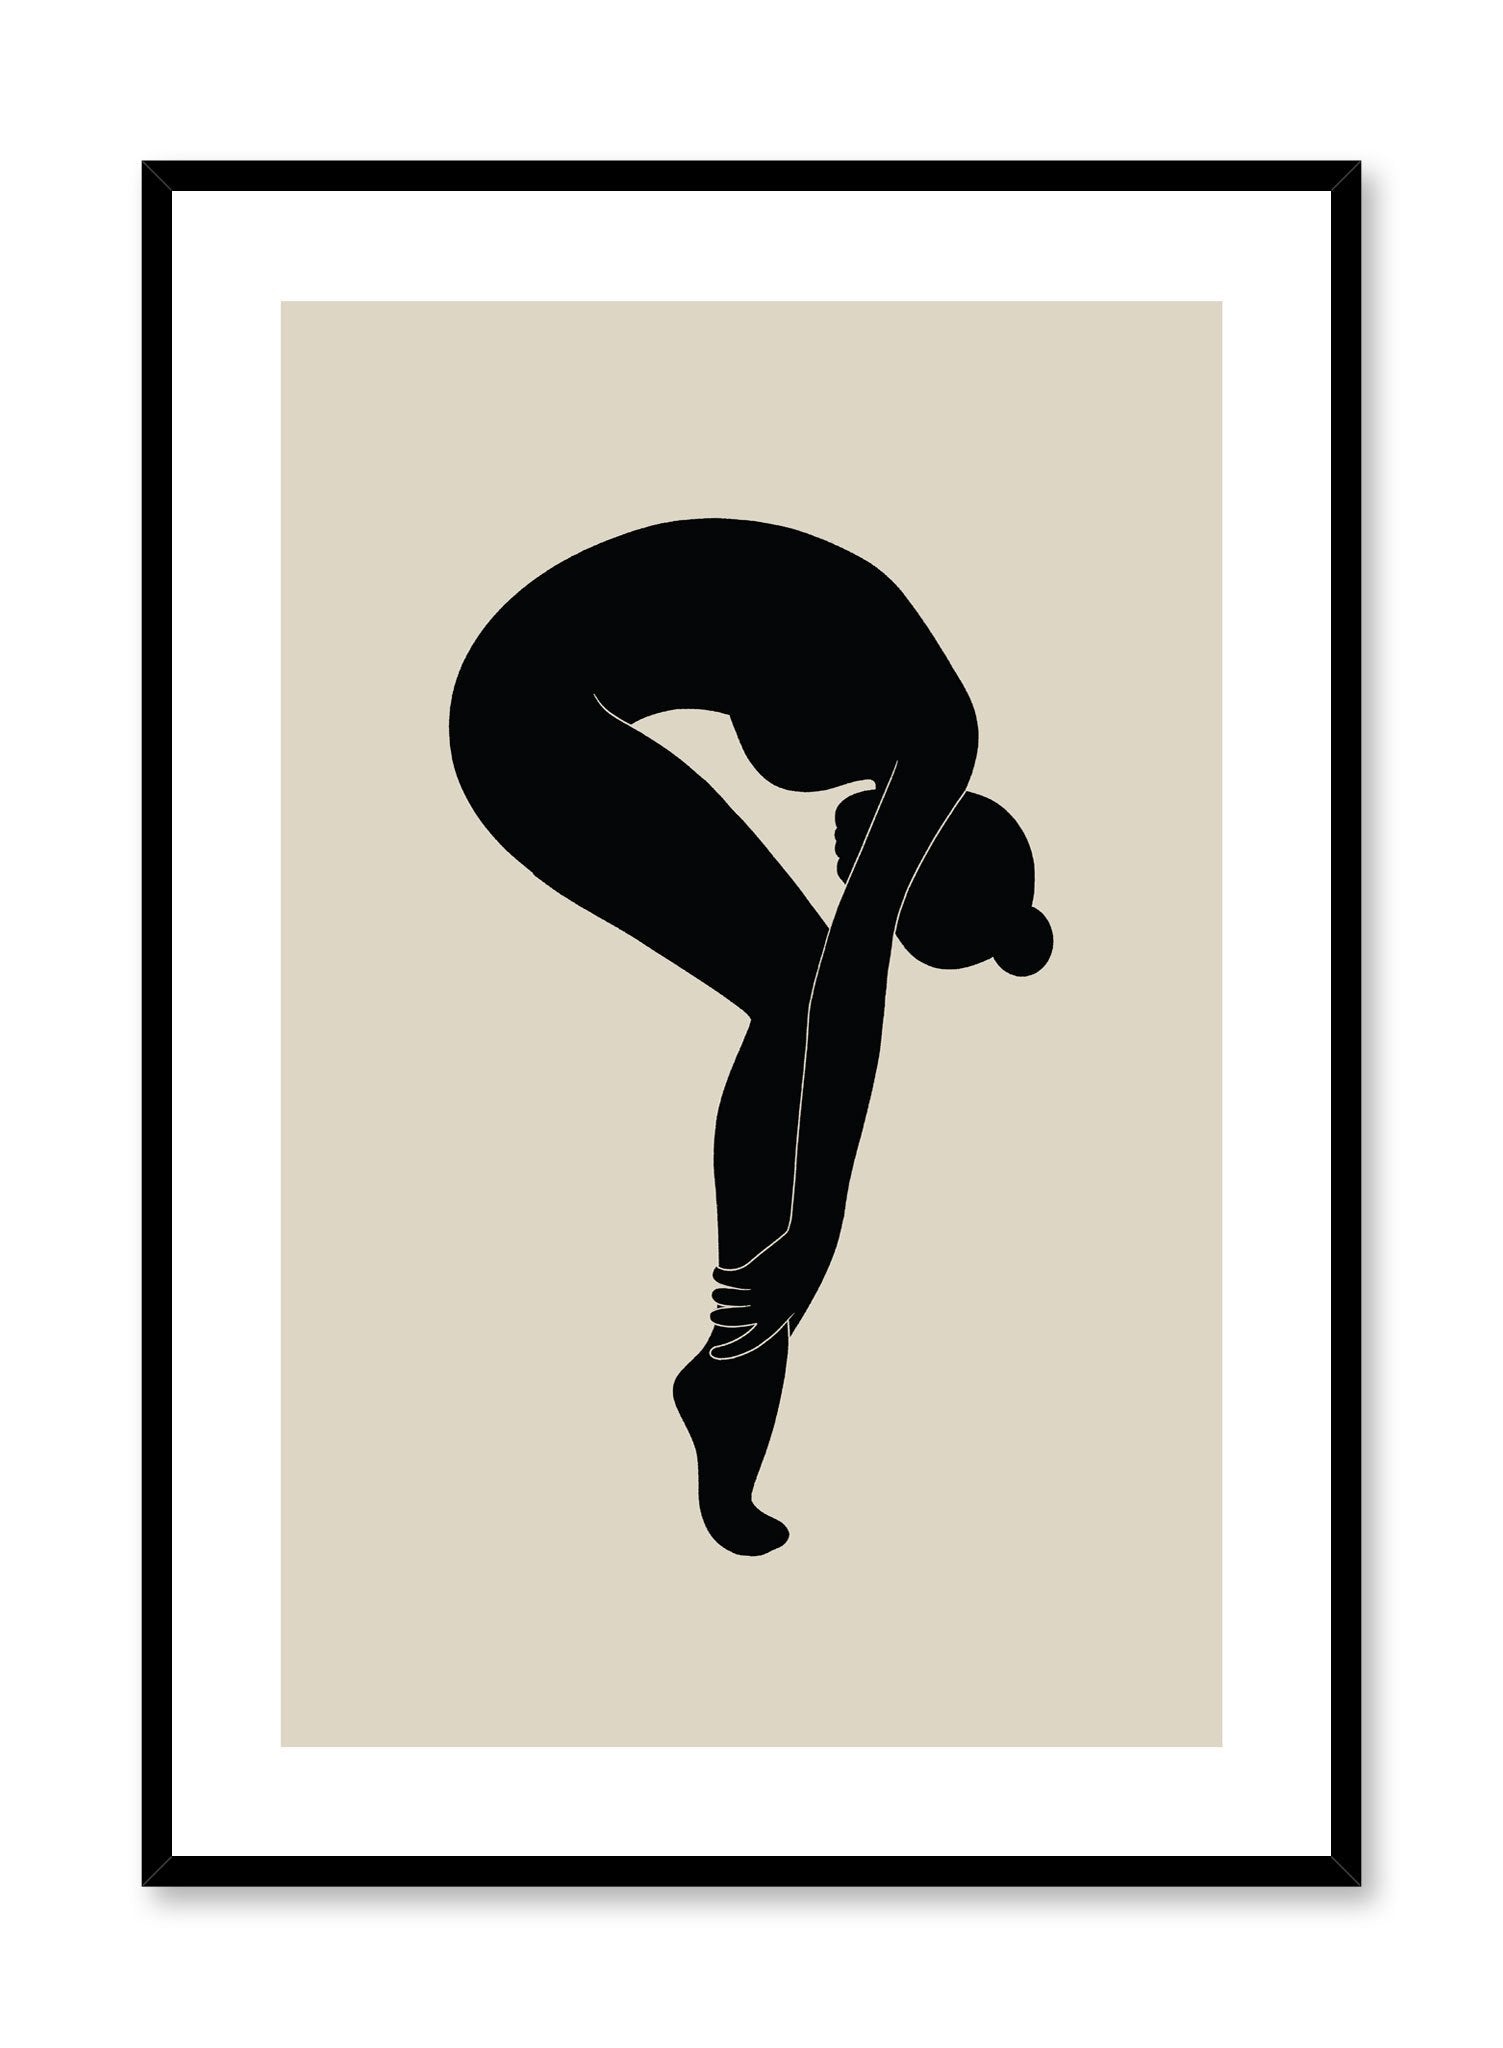 Minimalist design poster by Opposite Wall with abstract woman bending forward on pointe